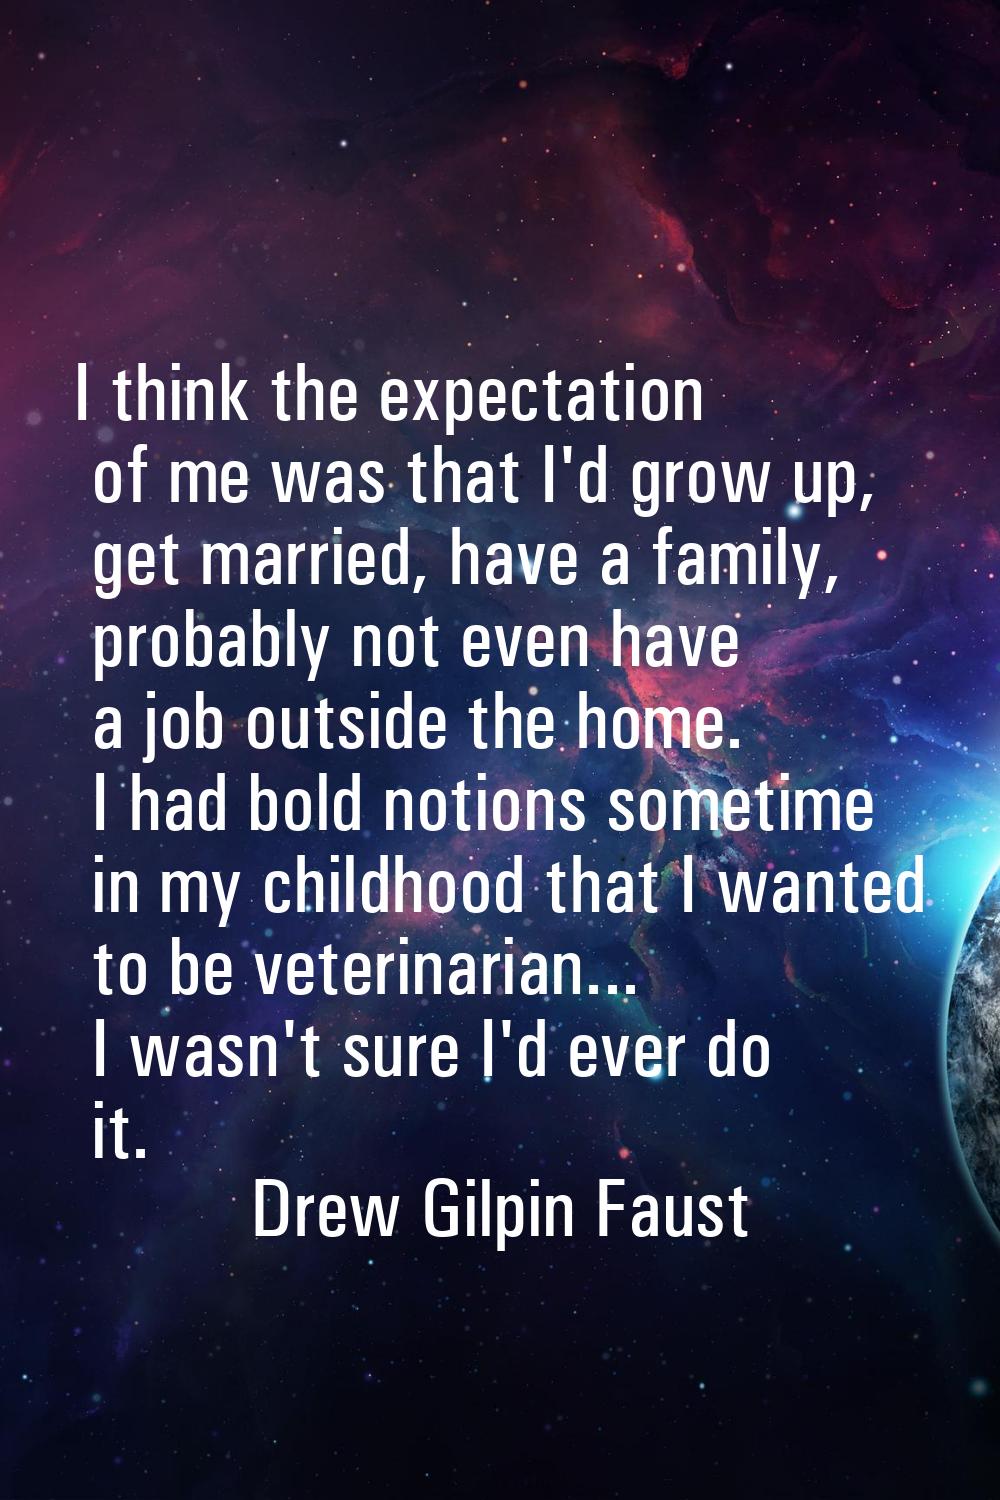 I think the expectation of me was that I'd grow up, get married, have a family, probably not even h